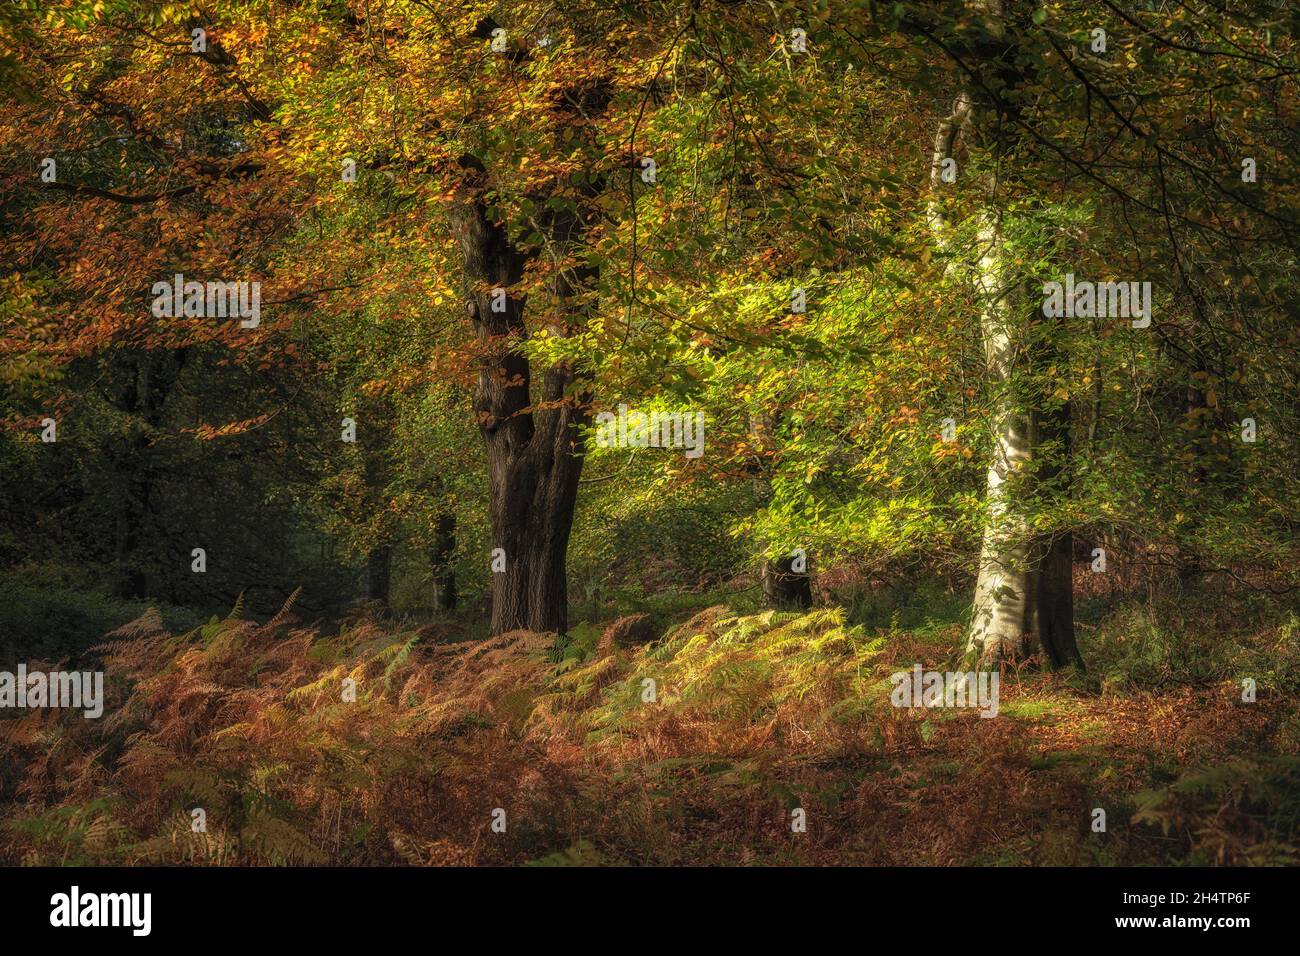 Golden autumnal fall tree and leaf colours at Birches Valley, Cannock Chase in Staffordshire, UK Stock Photo